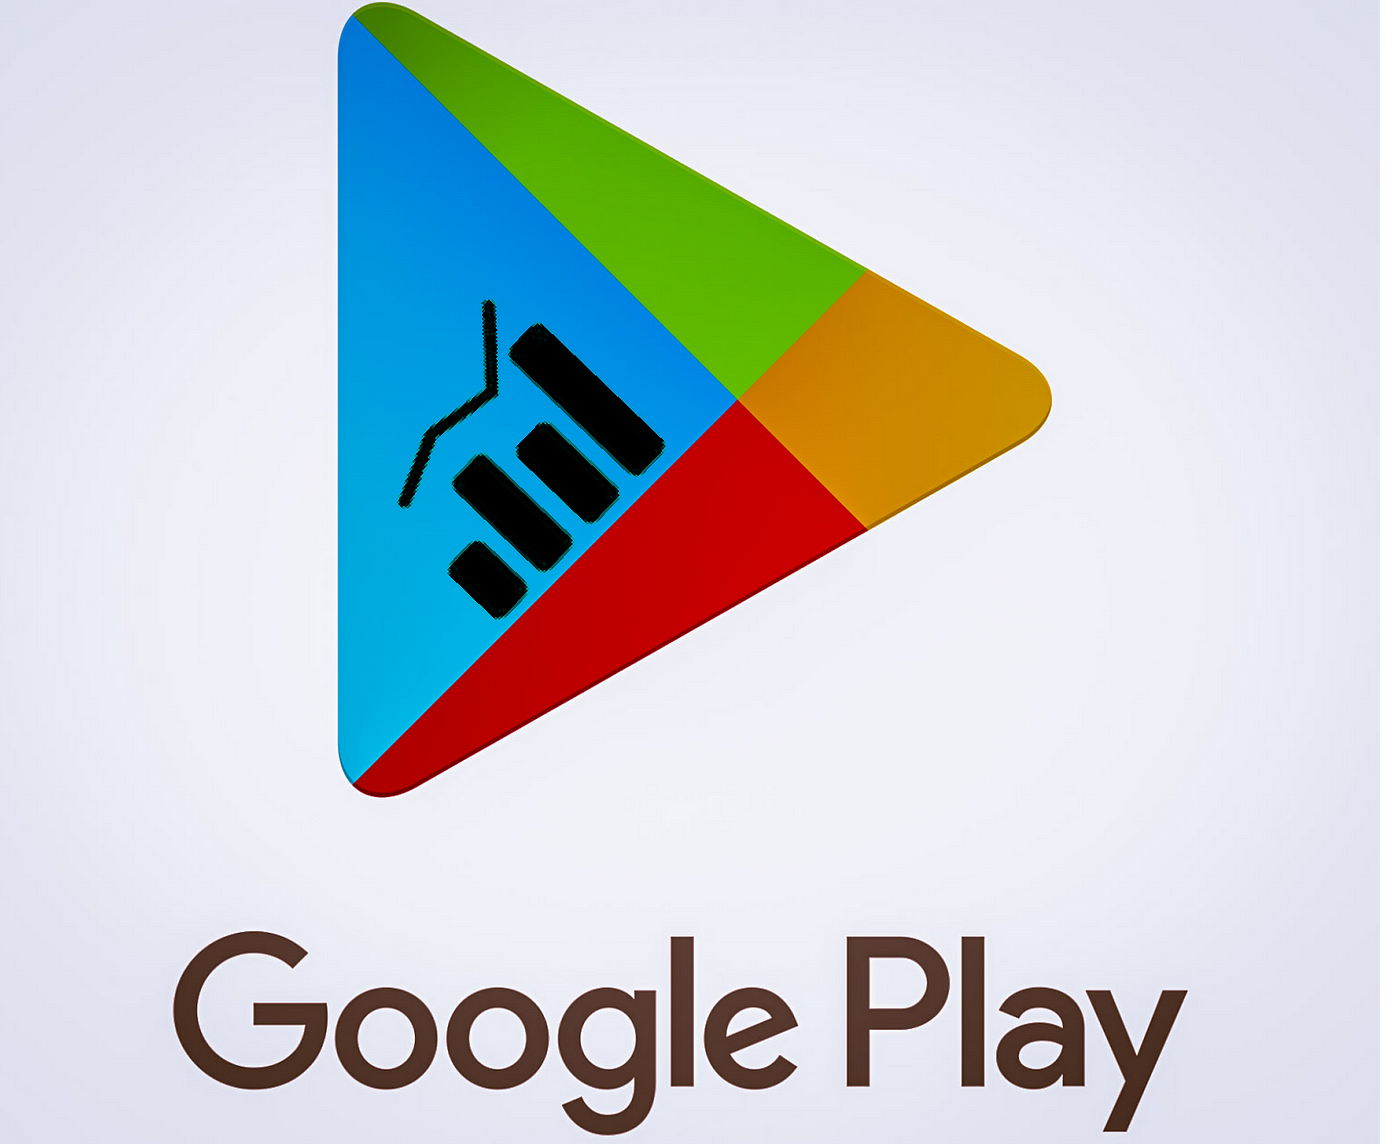 Insights from Google Play Store Apps, by Mohammed Hamdan